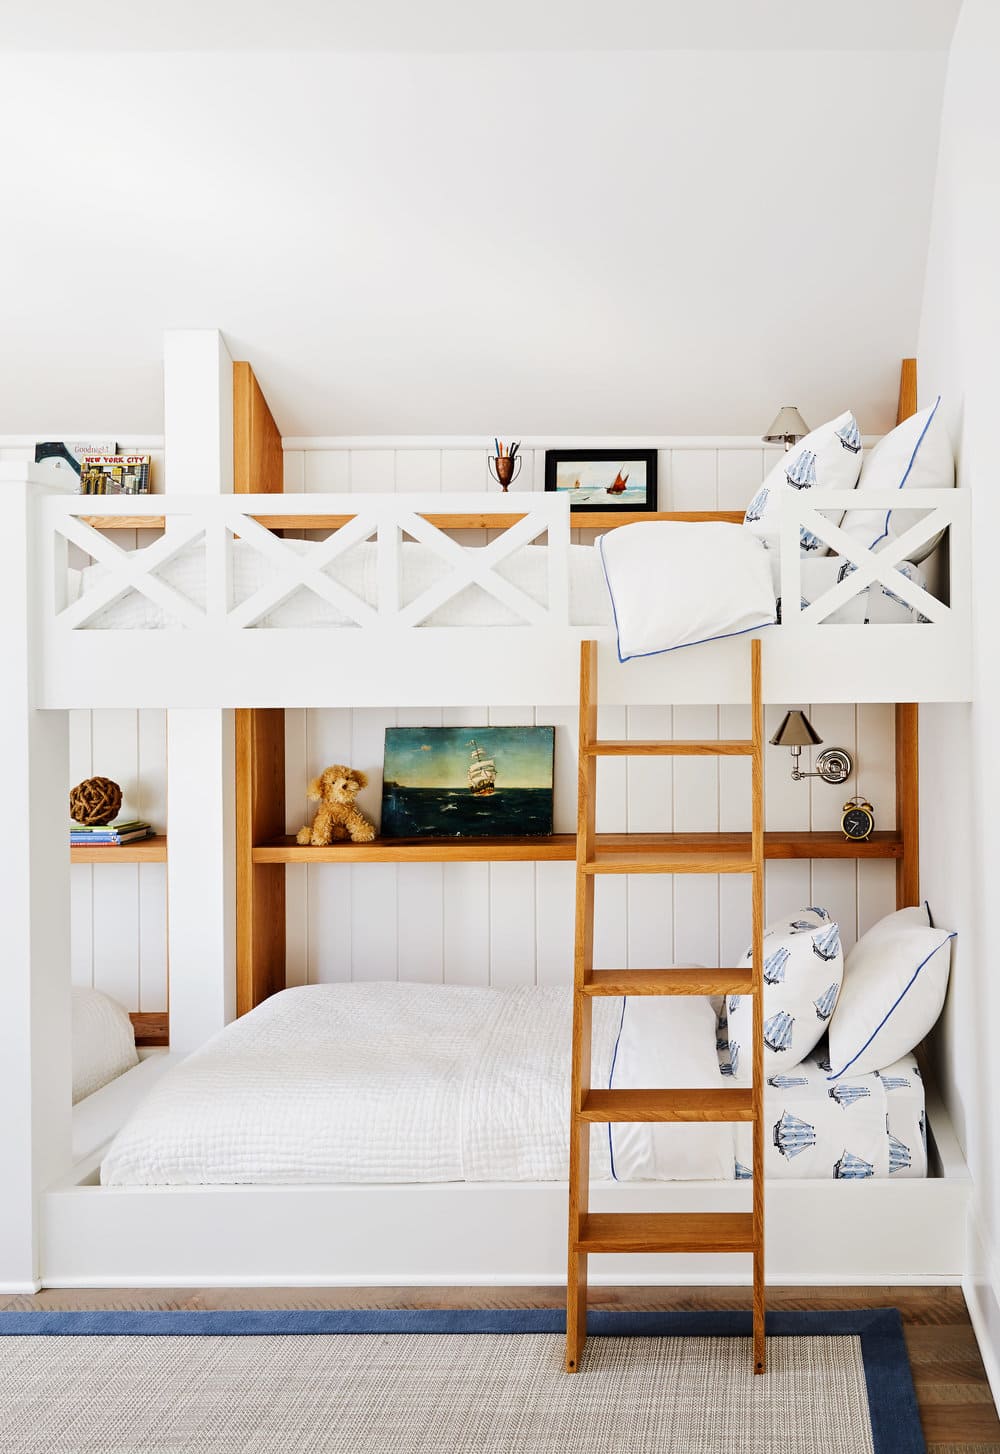 25 fantastic built-in bed ideas for children's rooms - 81